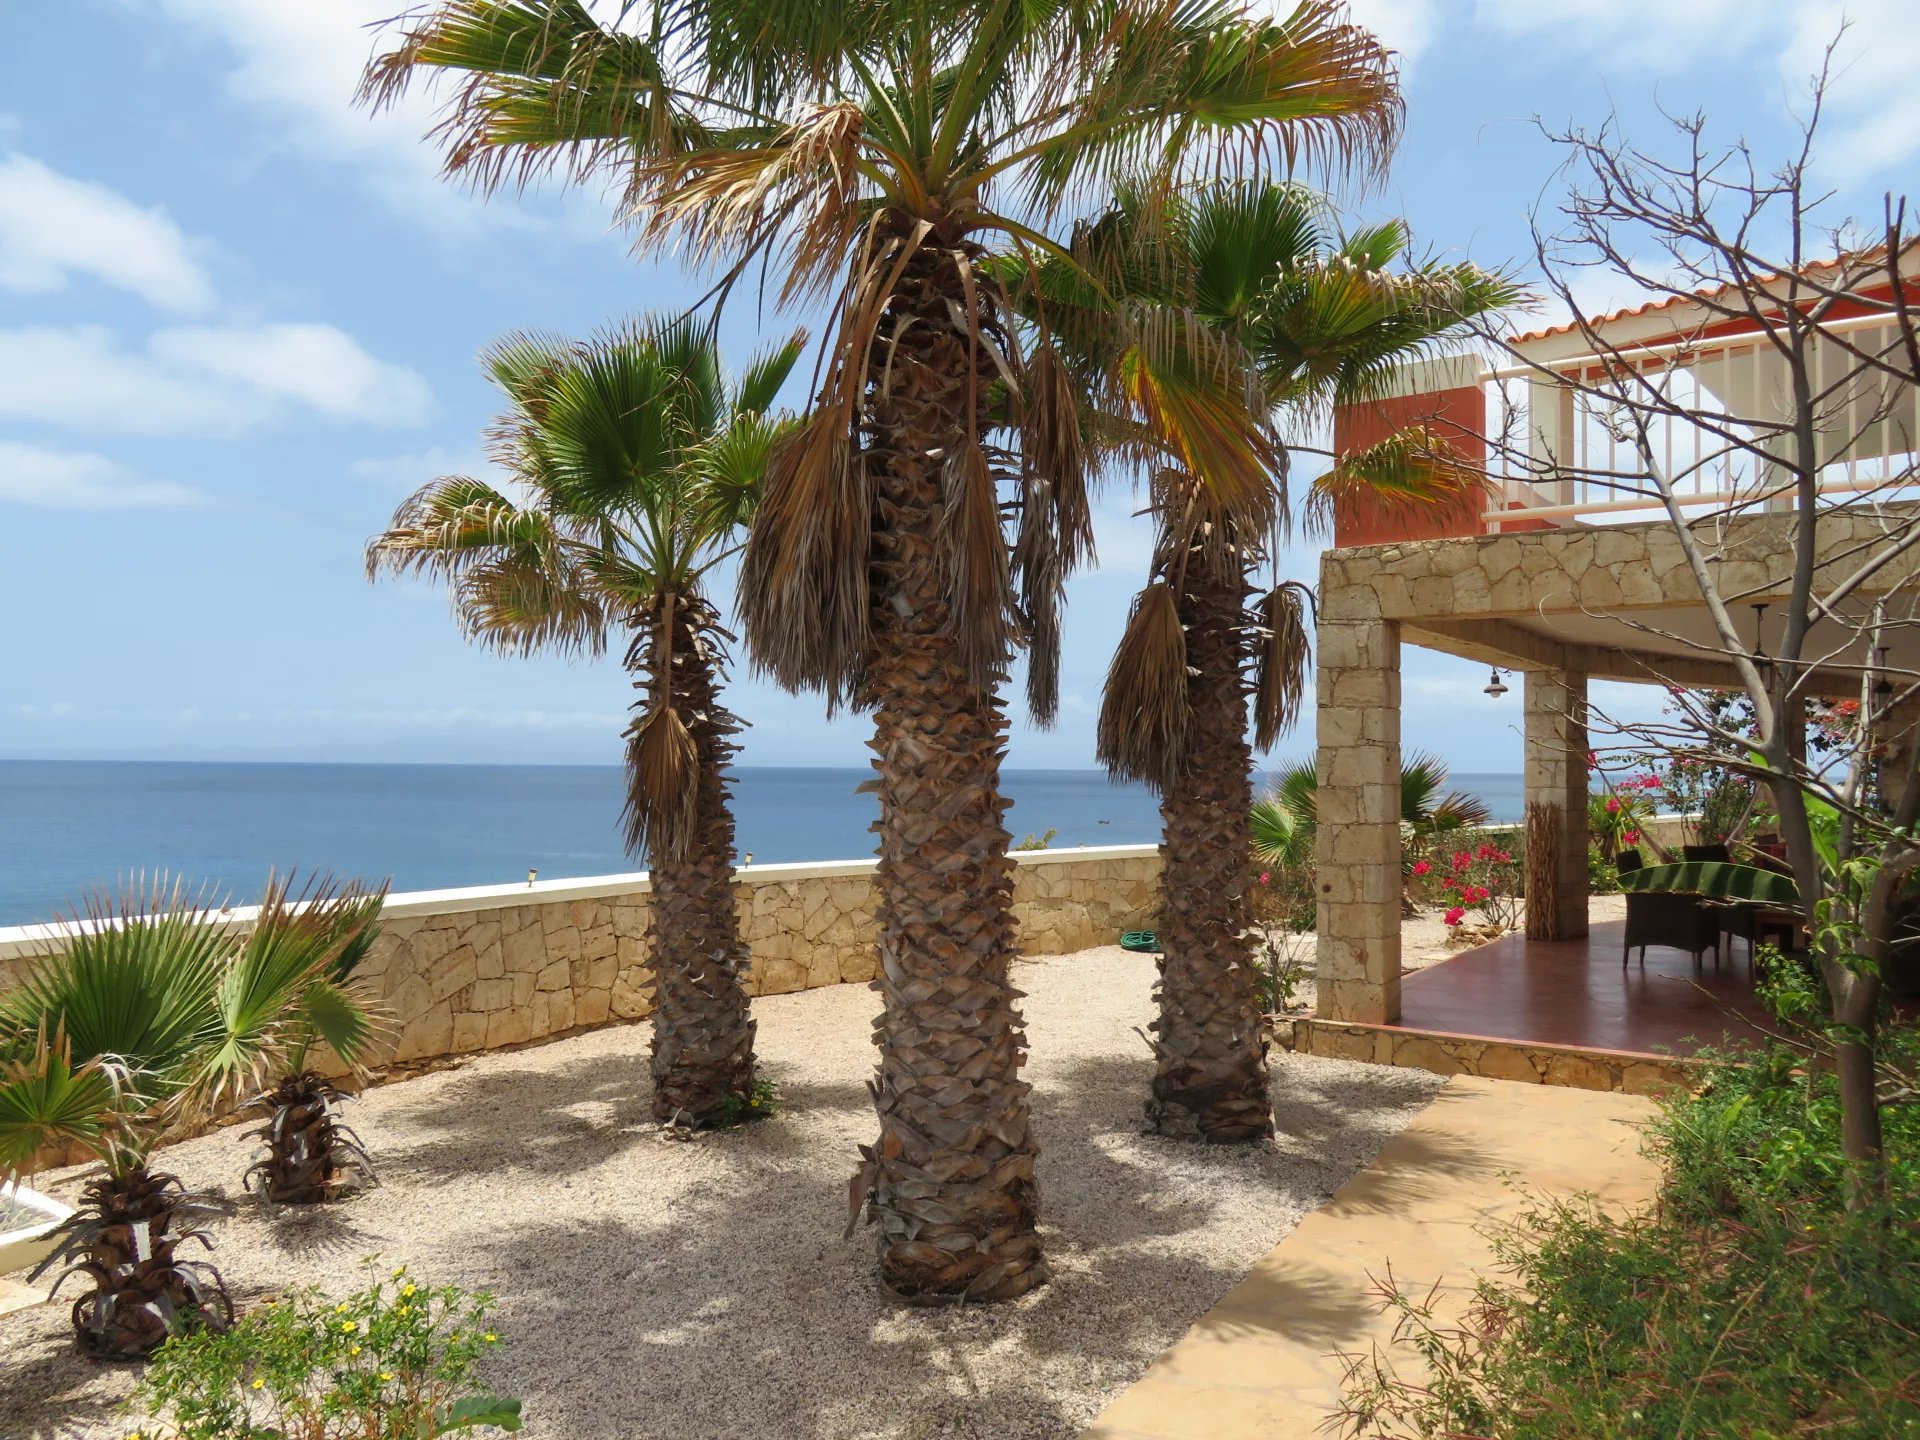 Sale Bed and breakfast - Maio - Cape Verde